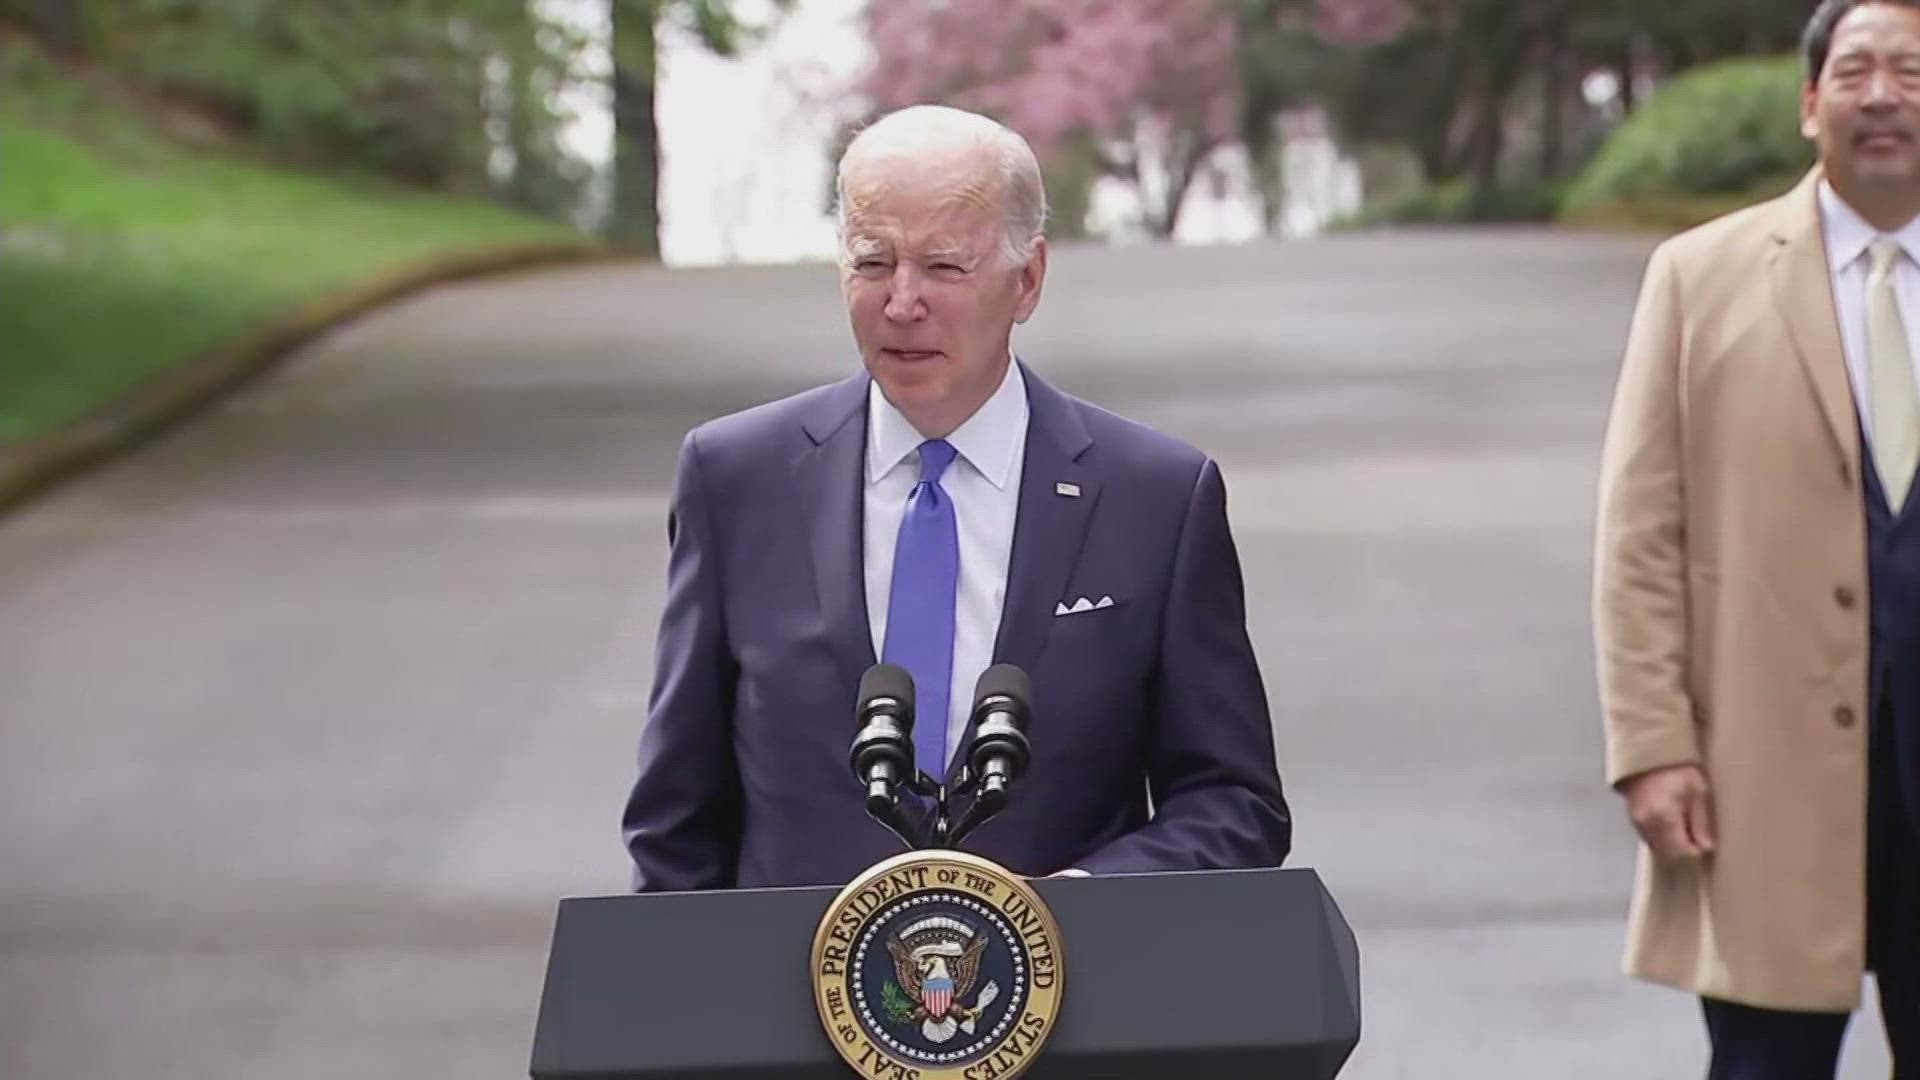 President Biden lays out his environmental plans for the future